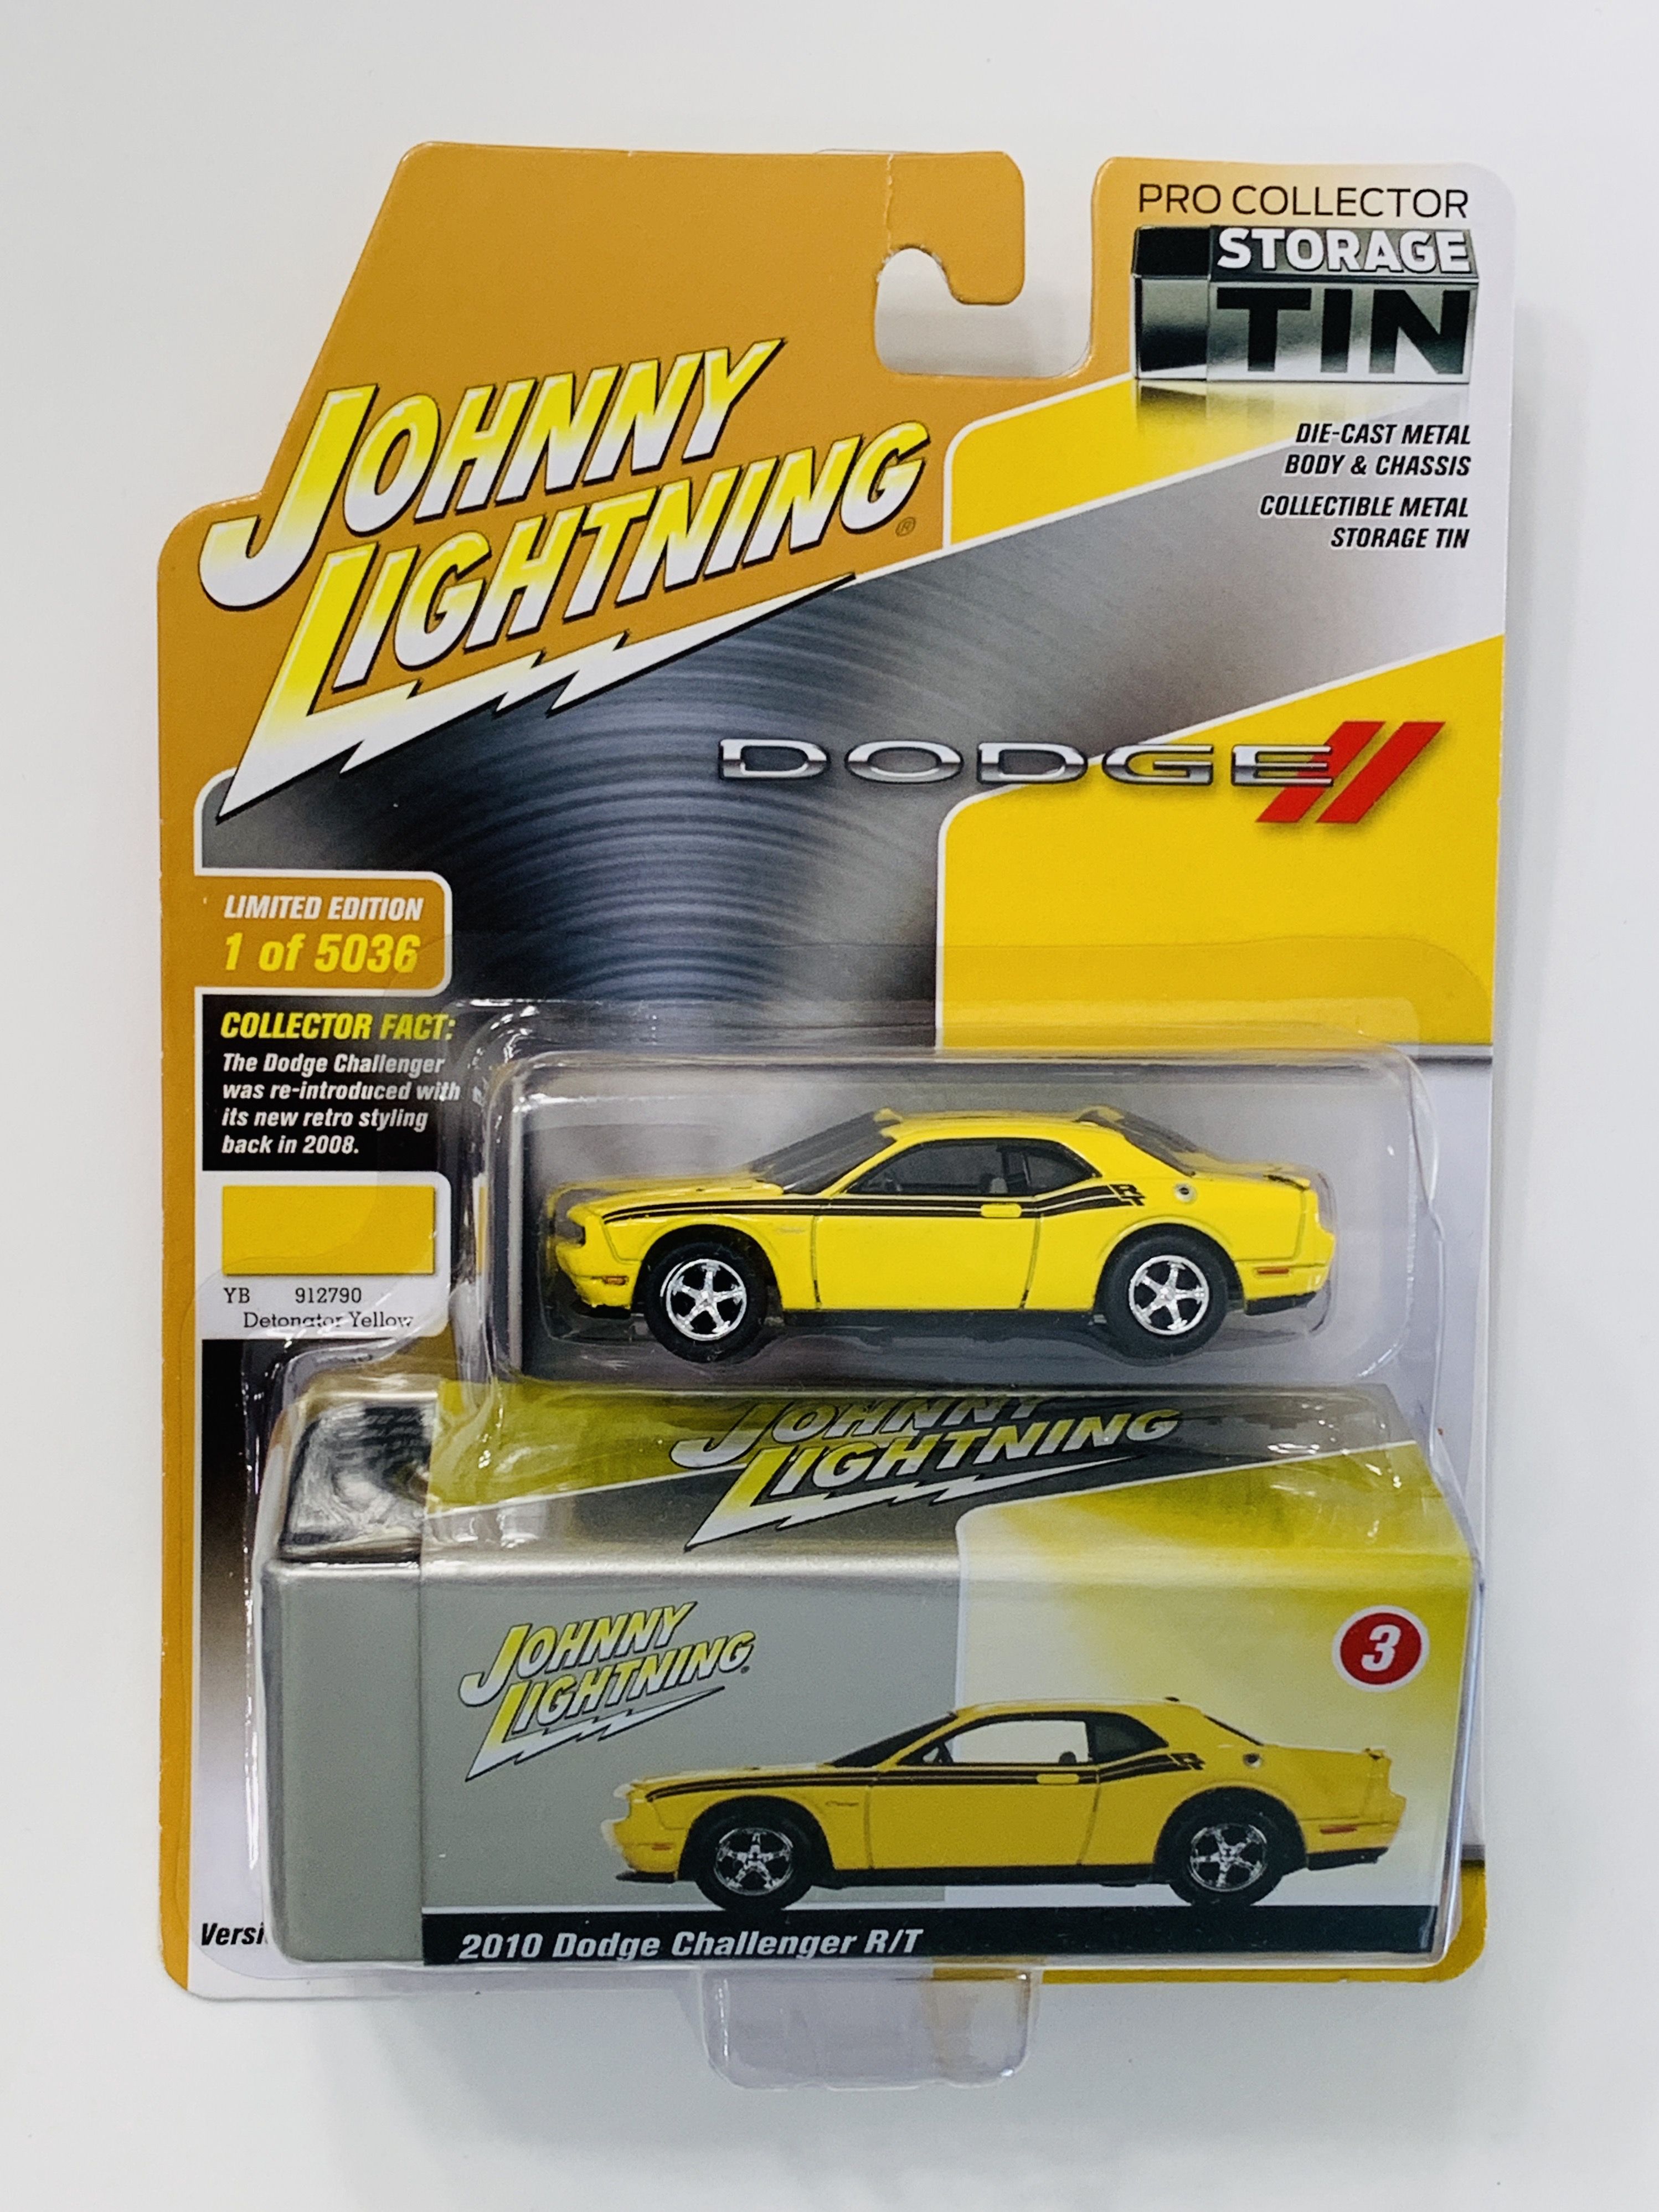 Johnny Lighting Pro Collector Tin 2010 Dodge Challenger R/T - Yellow